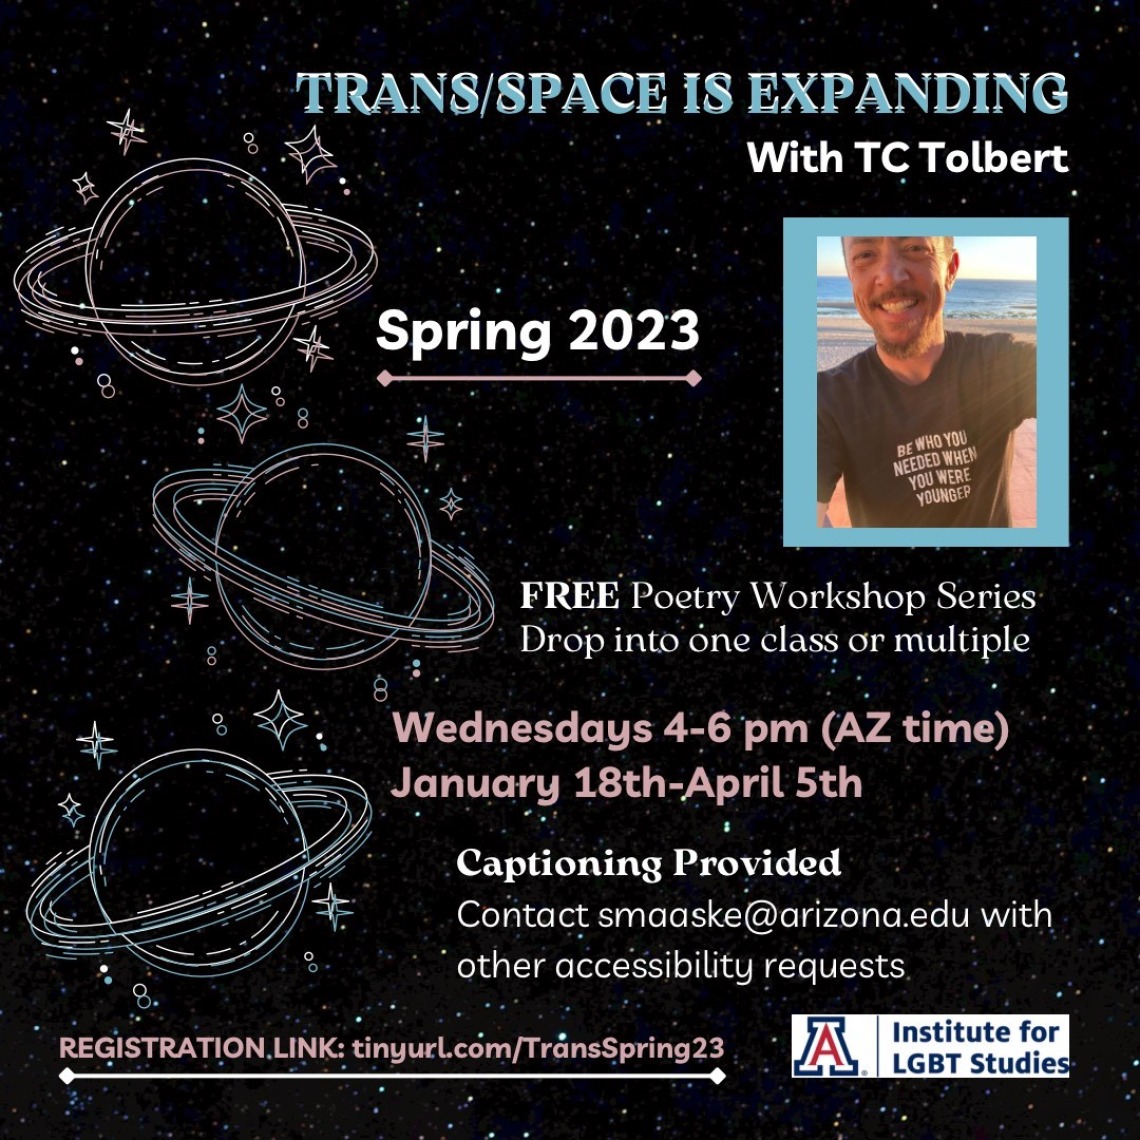 black background with stars and planets with rings in white. Trans flag colors (light blue, white, and light pink) text reads: “Trans/Space is Expanding with TC Tolbert. Spring 2023. FREE poetry workshop series. Drop into one class or multiple. Wednesdays 4-6pm (AZ time). January 18th-April 5th. Captioning provided. Contact smaaske@arizona.edu with other accessibility requests. Registration link: tinyurl.com/TransSpring23”. 